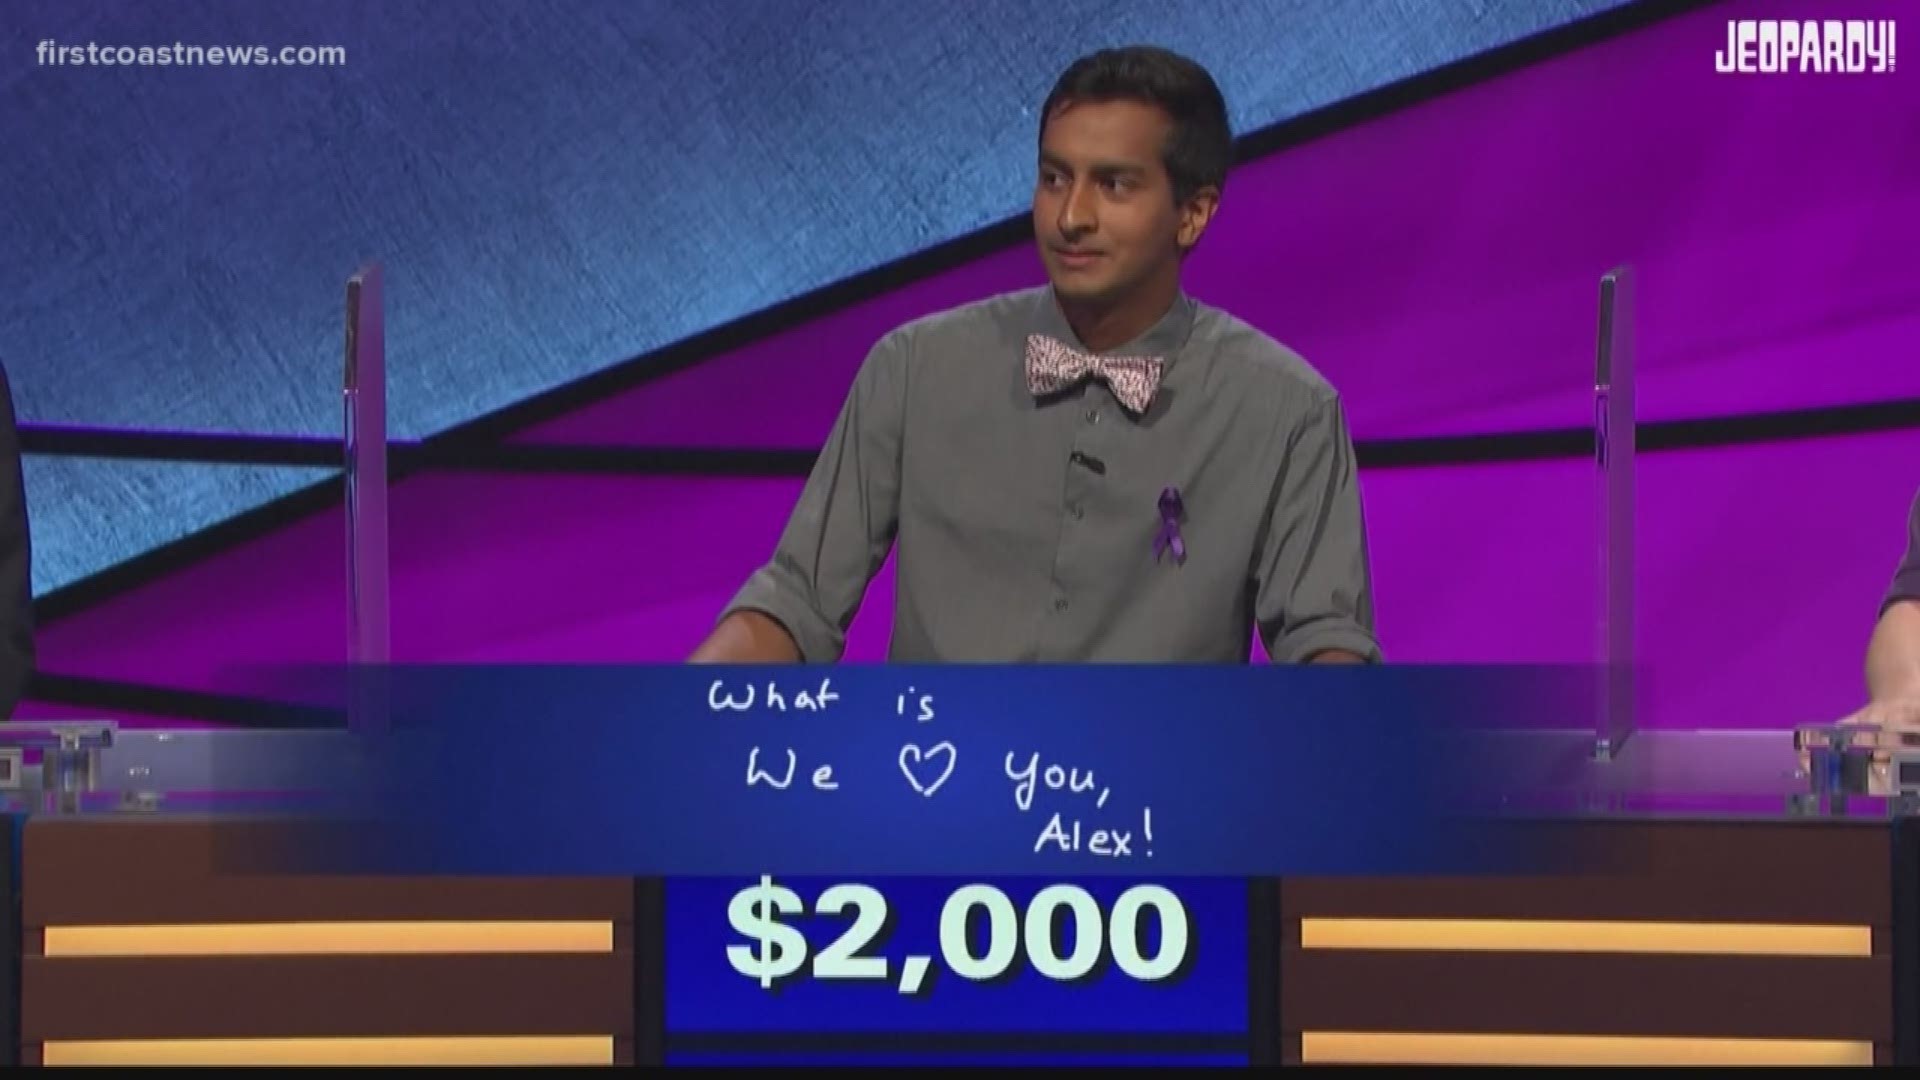 A contestant on the show lost nearly $2,000 to give the 35-year 'Jeopardy!' host a message of support and gratitude.